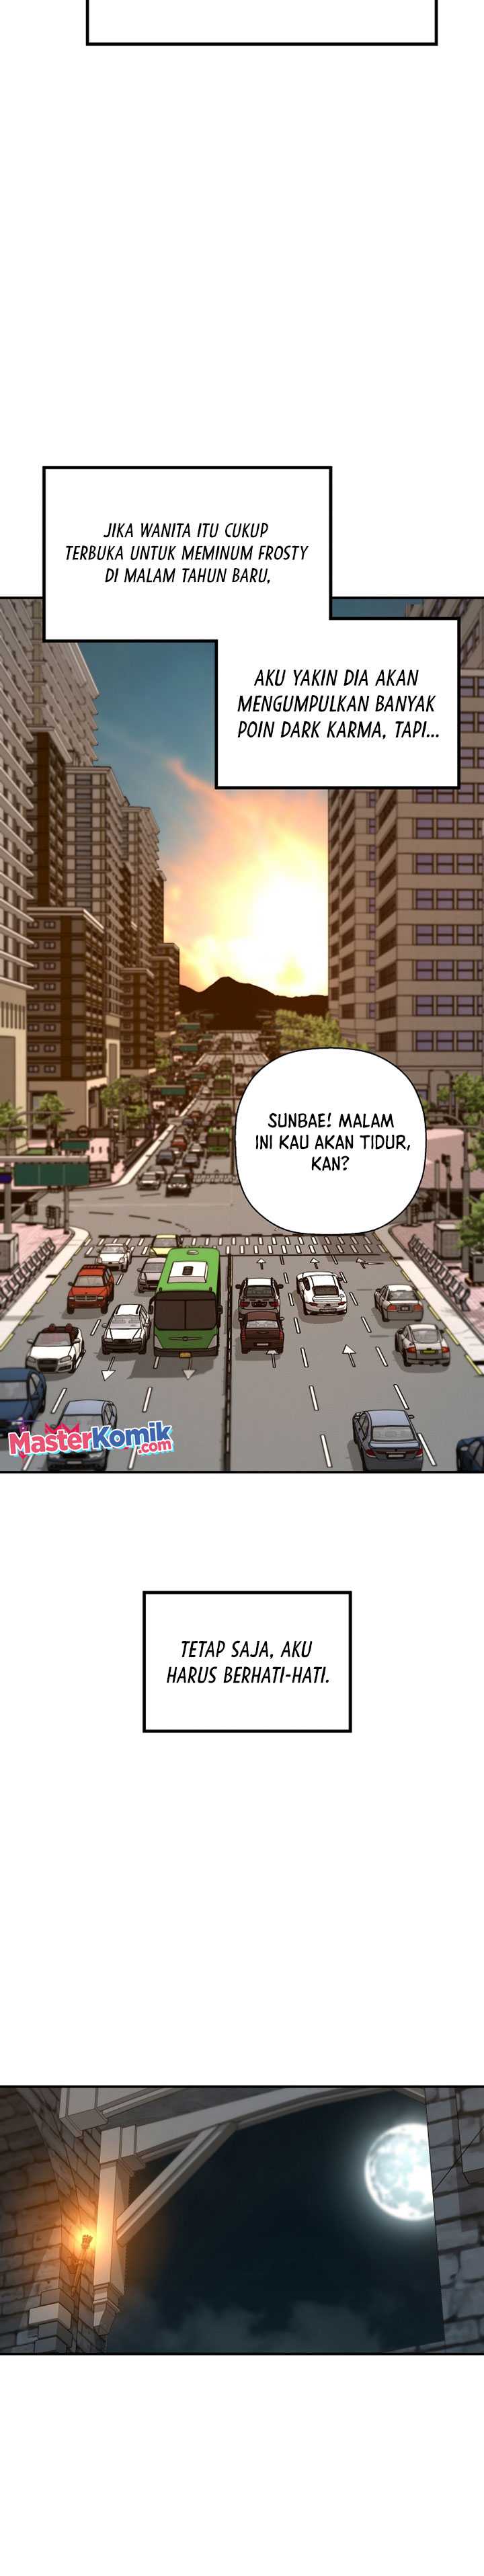 Return of the Legend Chapter 68 bahasa indonesia